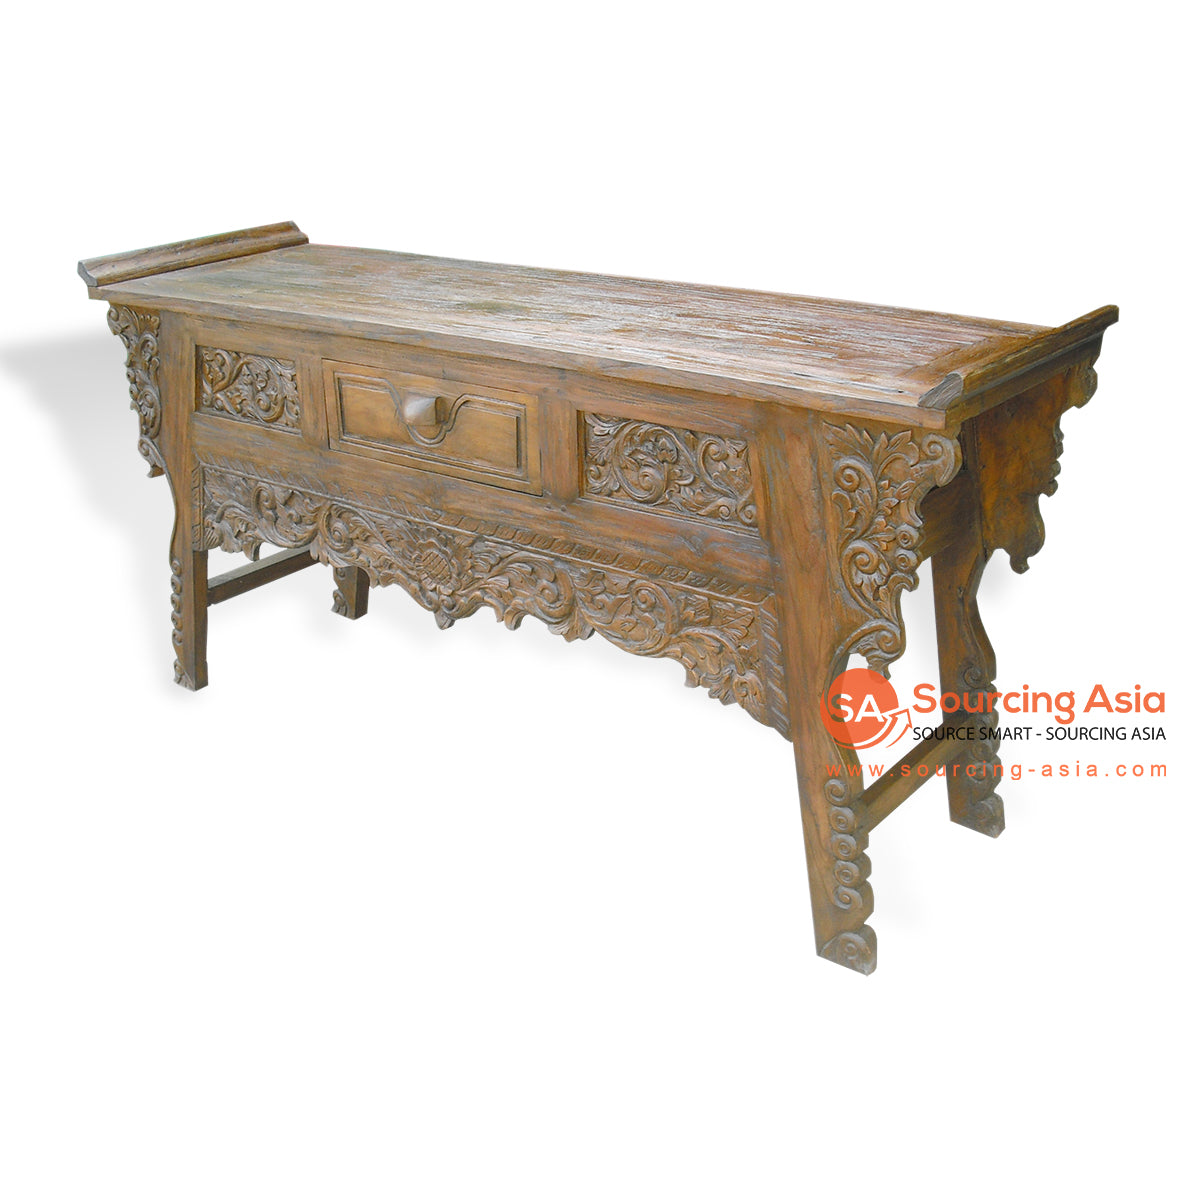 KYT10006-CHO CHOCOLATE TEAK WOOD ONE DRAWER CONSOLE TABLE WITH FULL CARVING